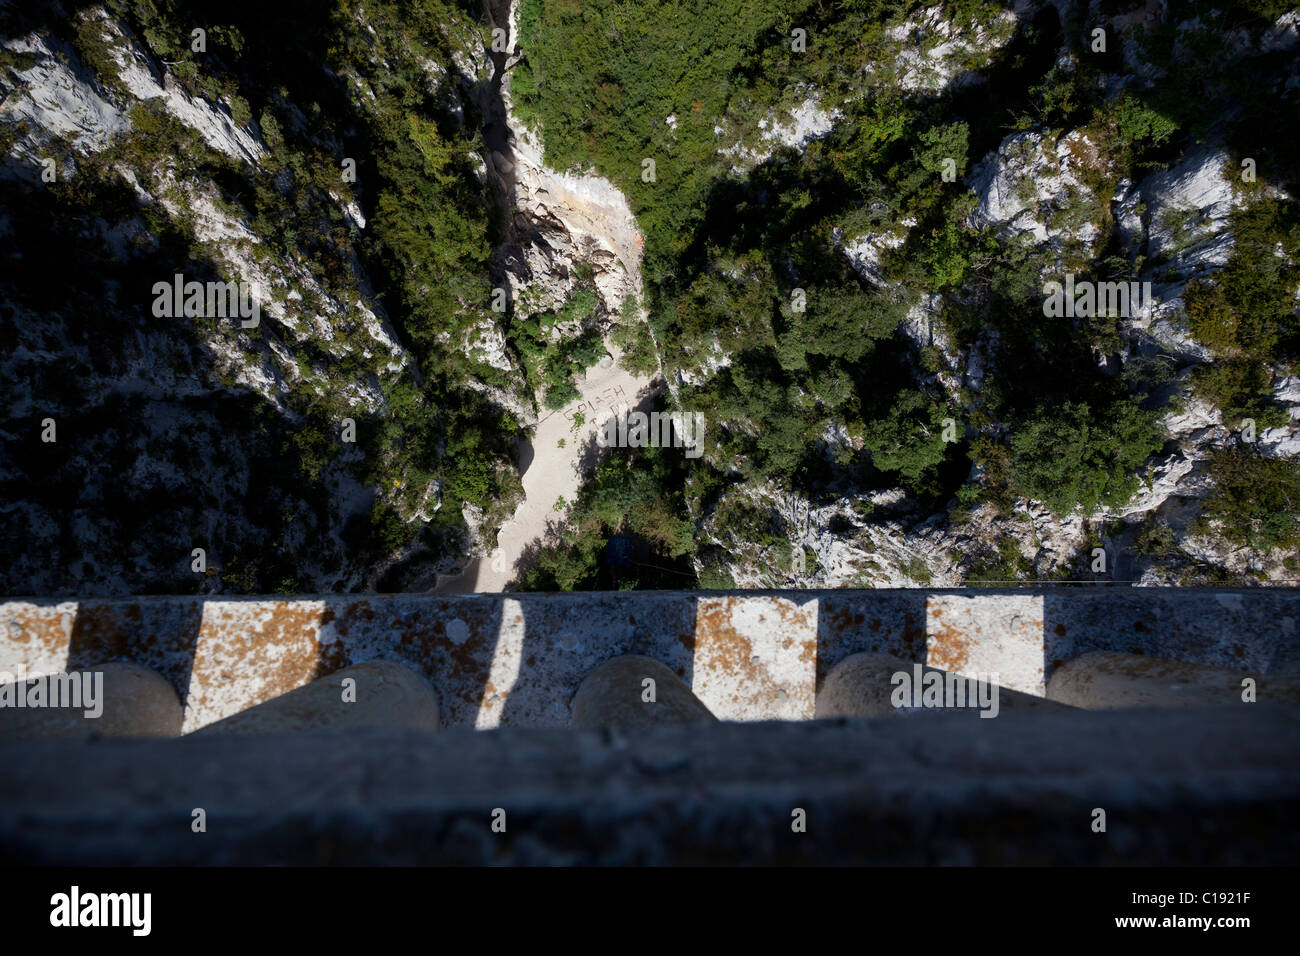 View of the 'landing site' from a bridge used for bungee jumping in the Gorges du Verdon, France Stock Photo